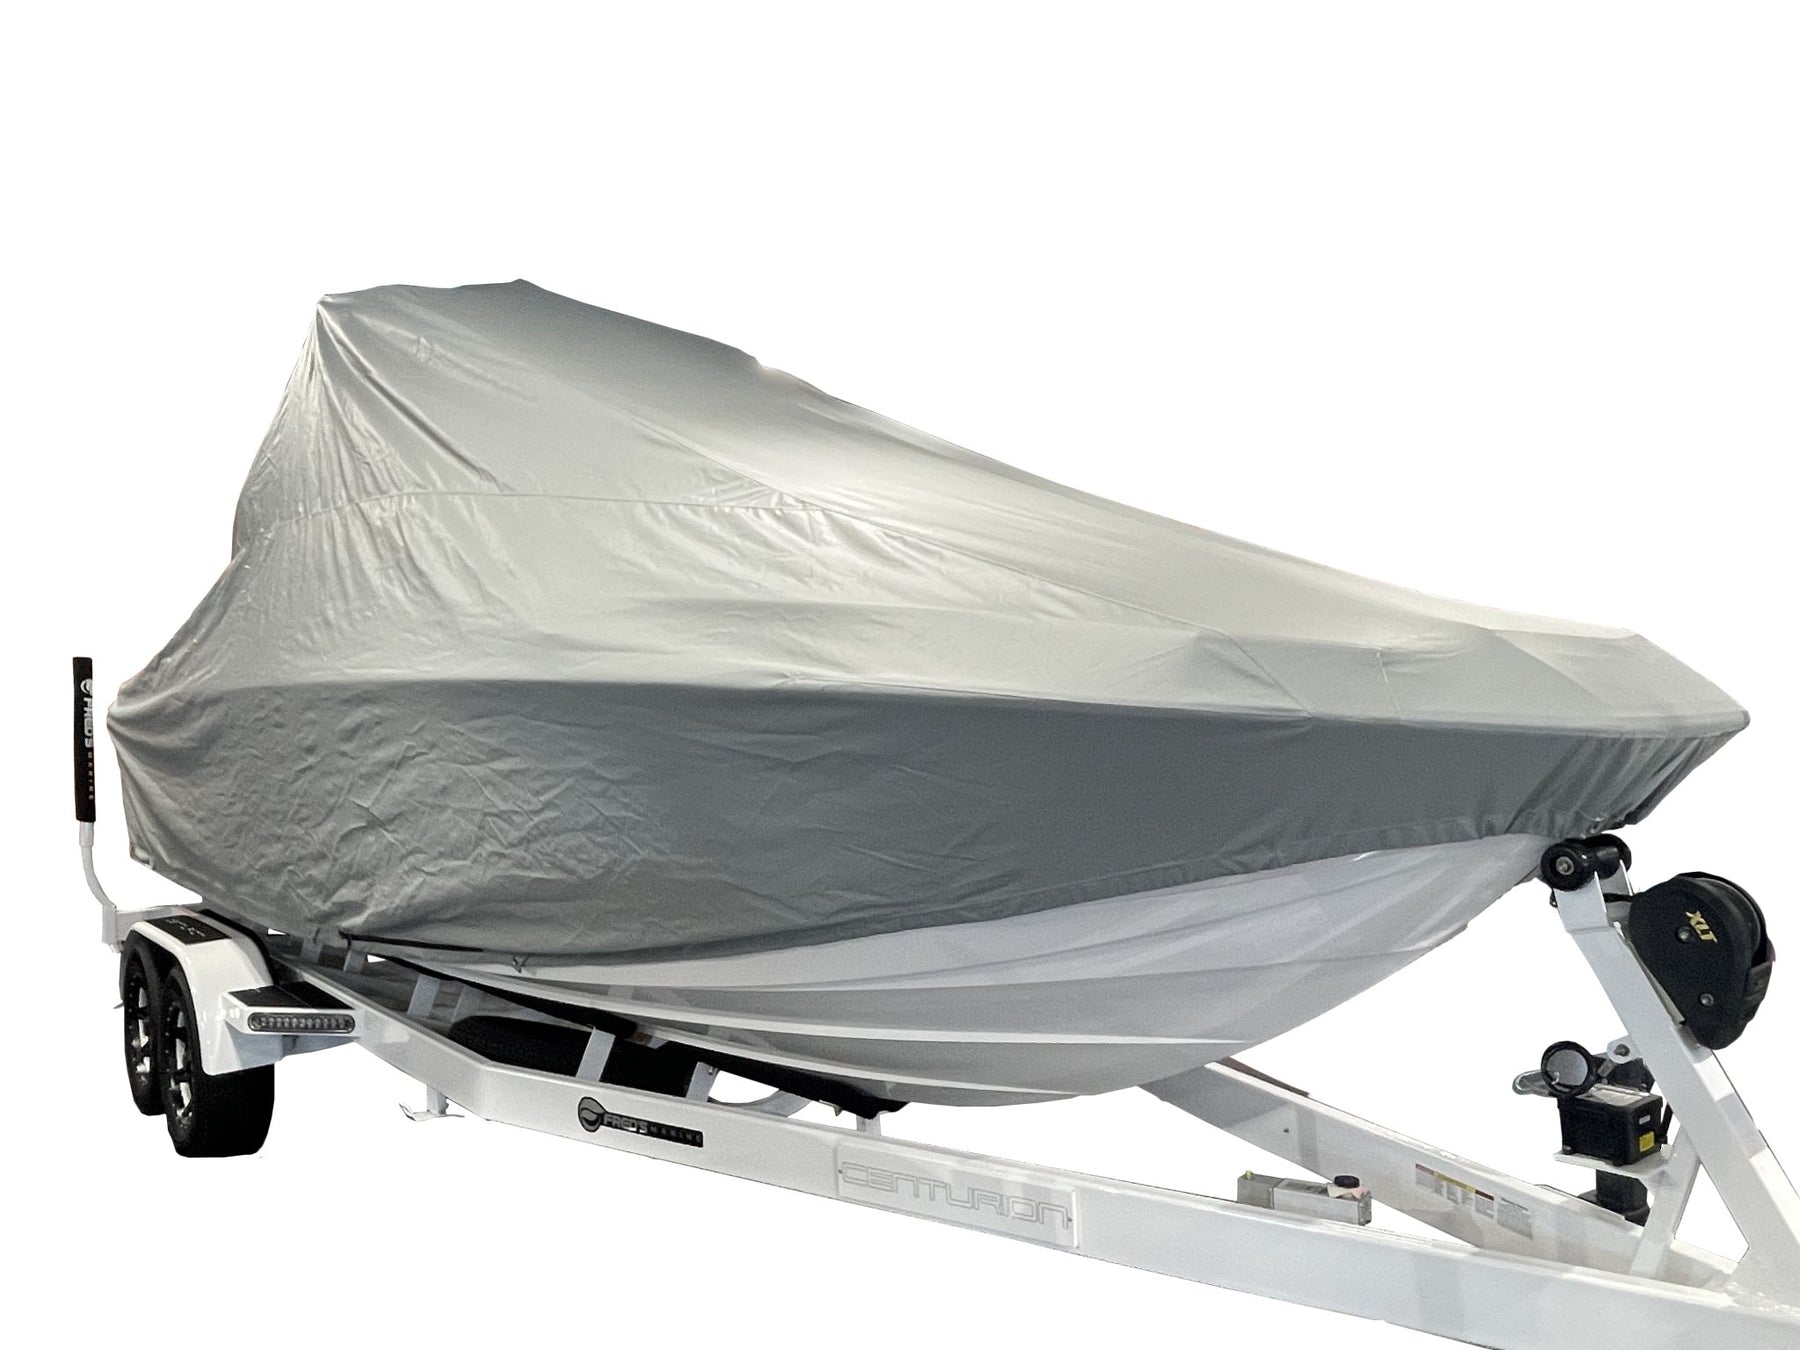 Centurion Ri245 with Dropzone Tower and Roswell bimini Double Up Storage Cover - BoardCo